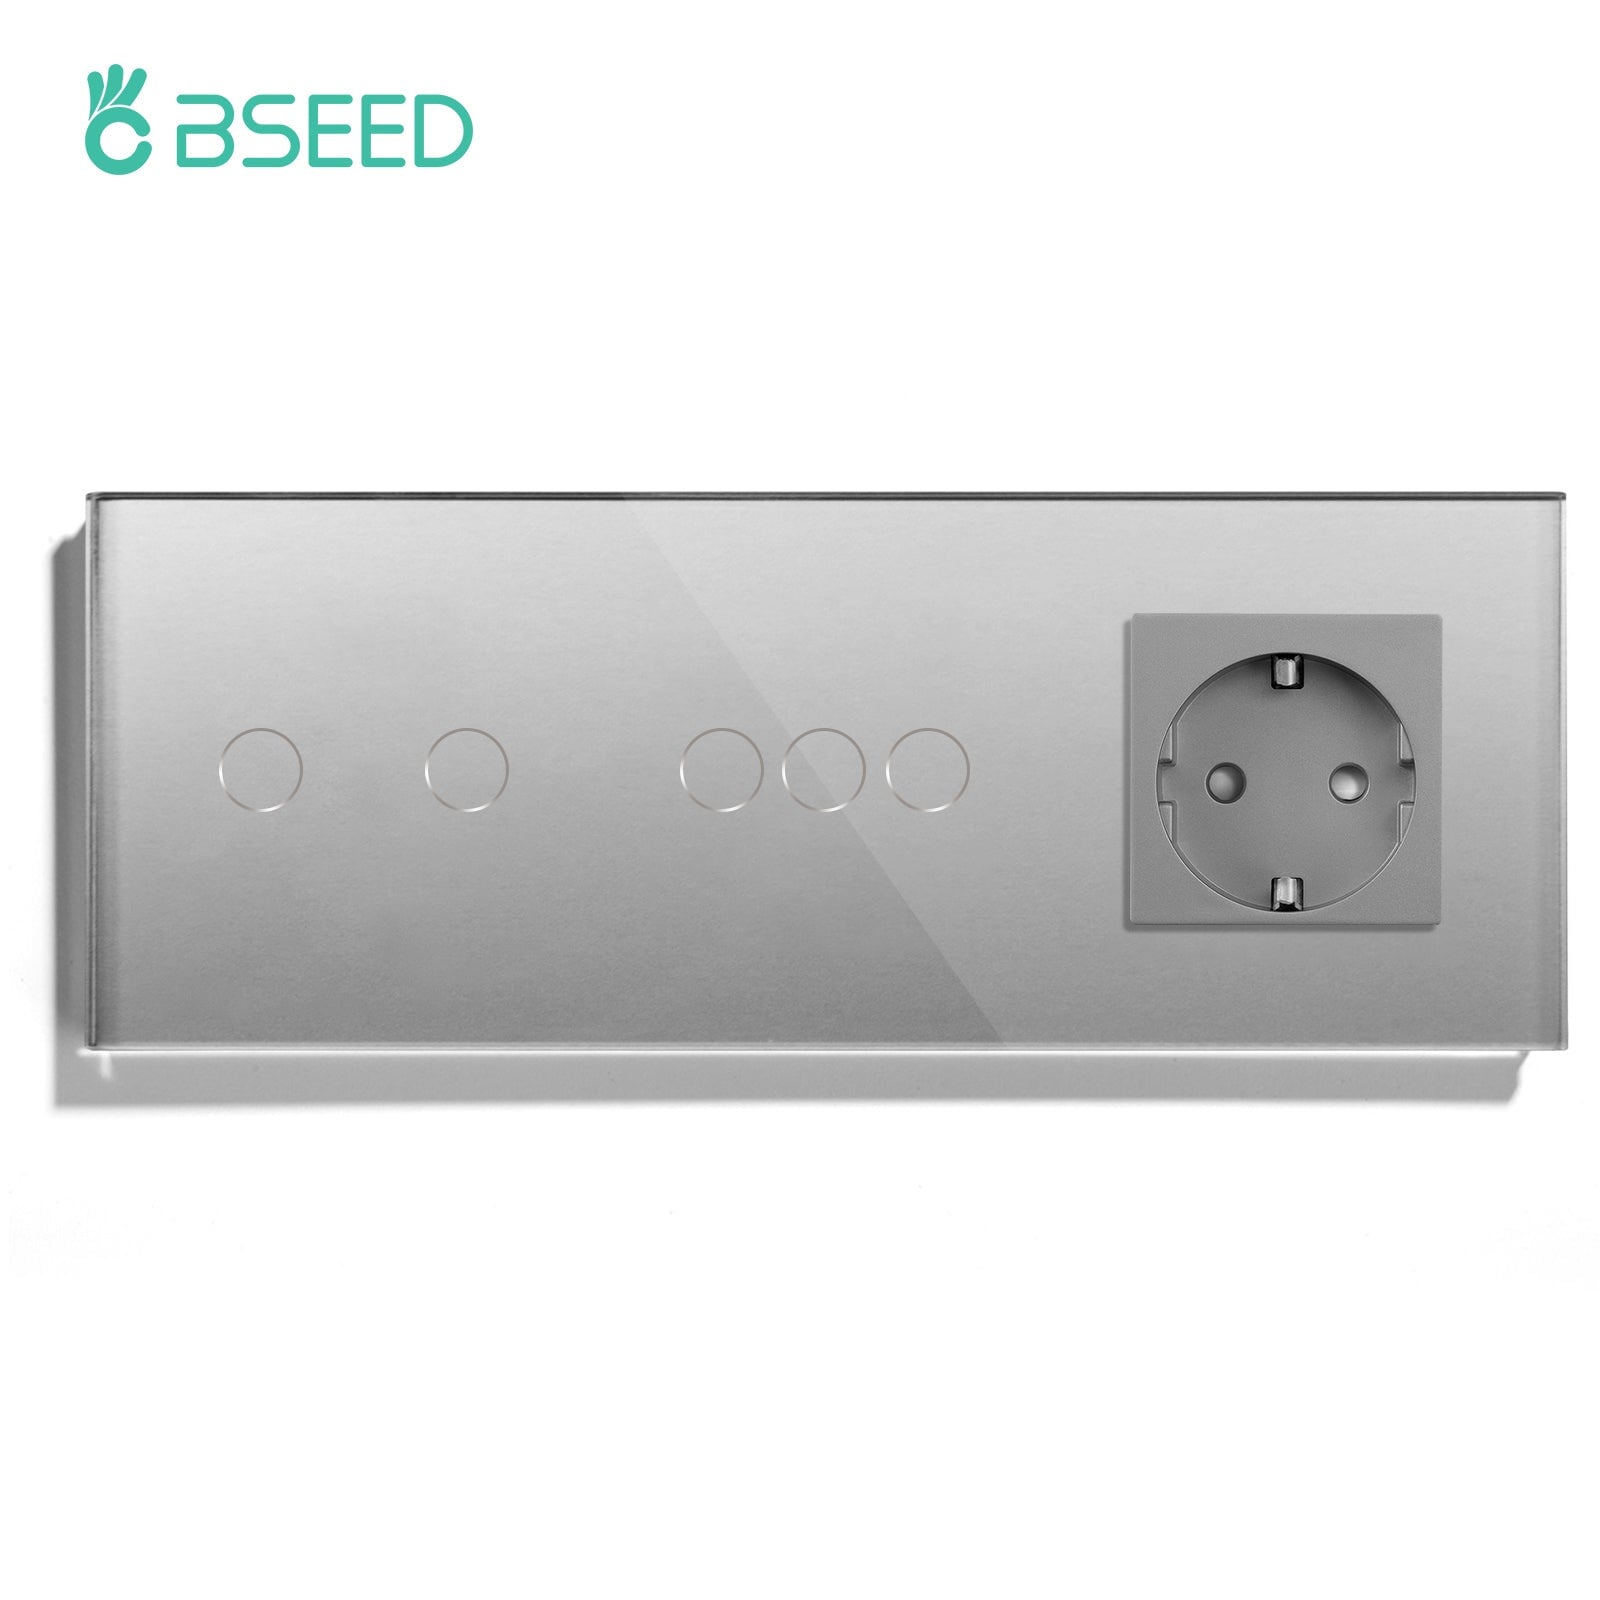 BSEED Double Touch 1/2/3 Gnag 1/2/3 Way Light Switch With EU Socket Power Outlets & Sockets Bseedswitch Grey 2gang+3gang 1Way